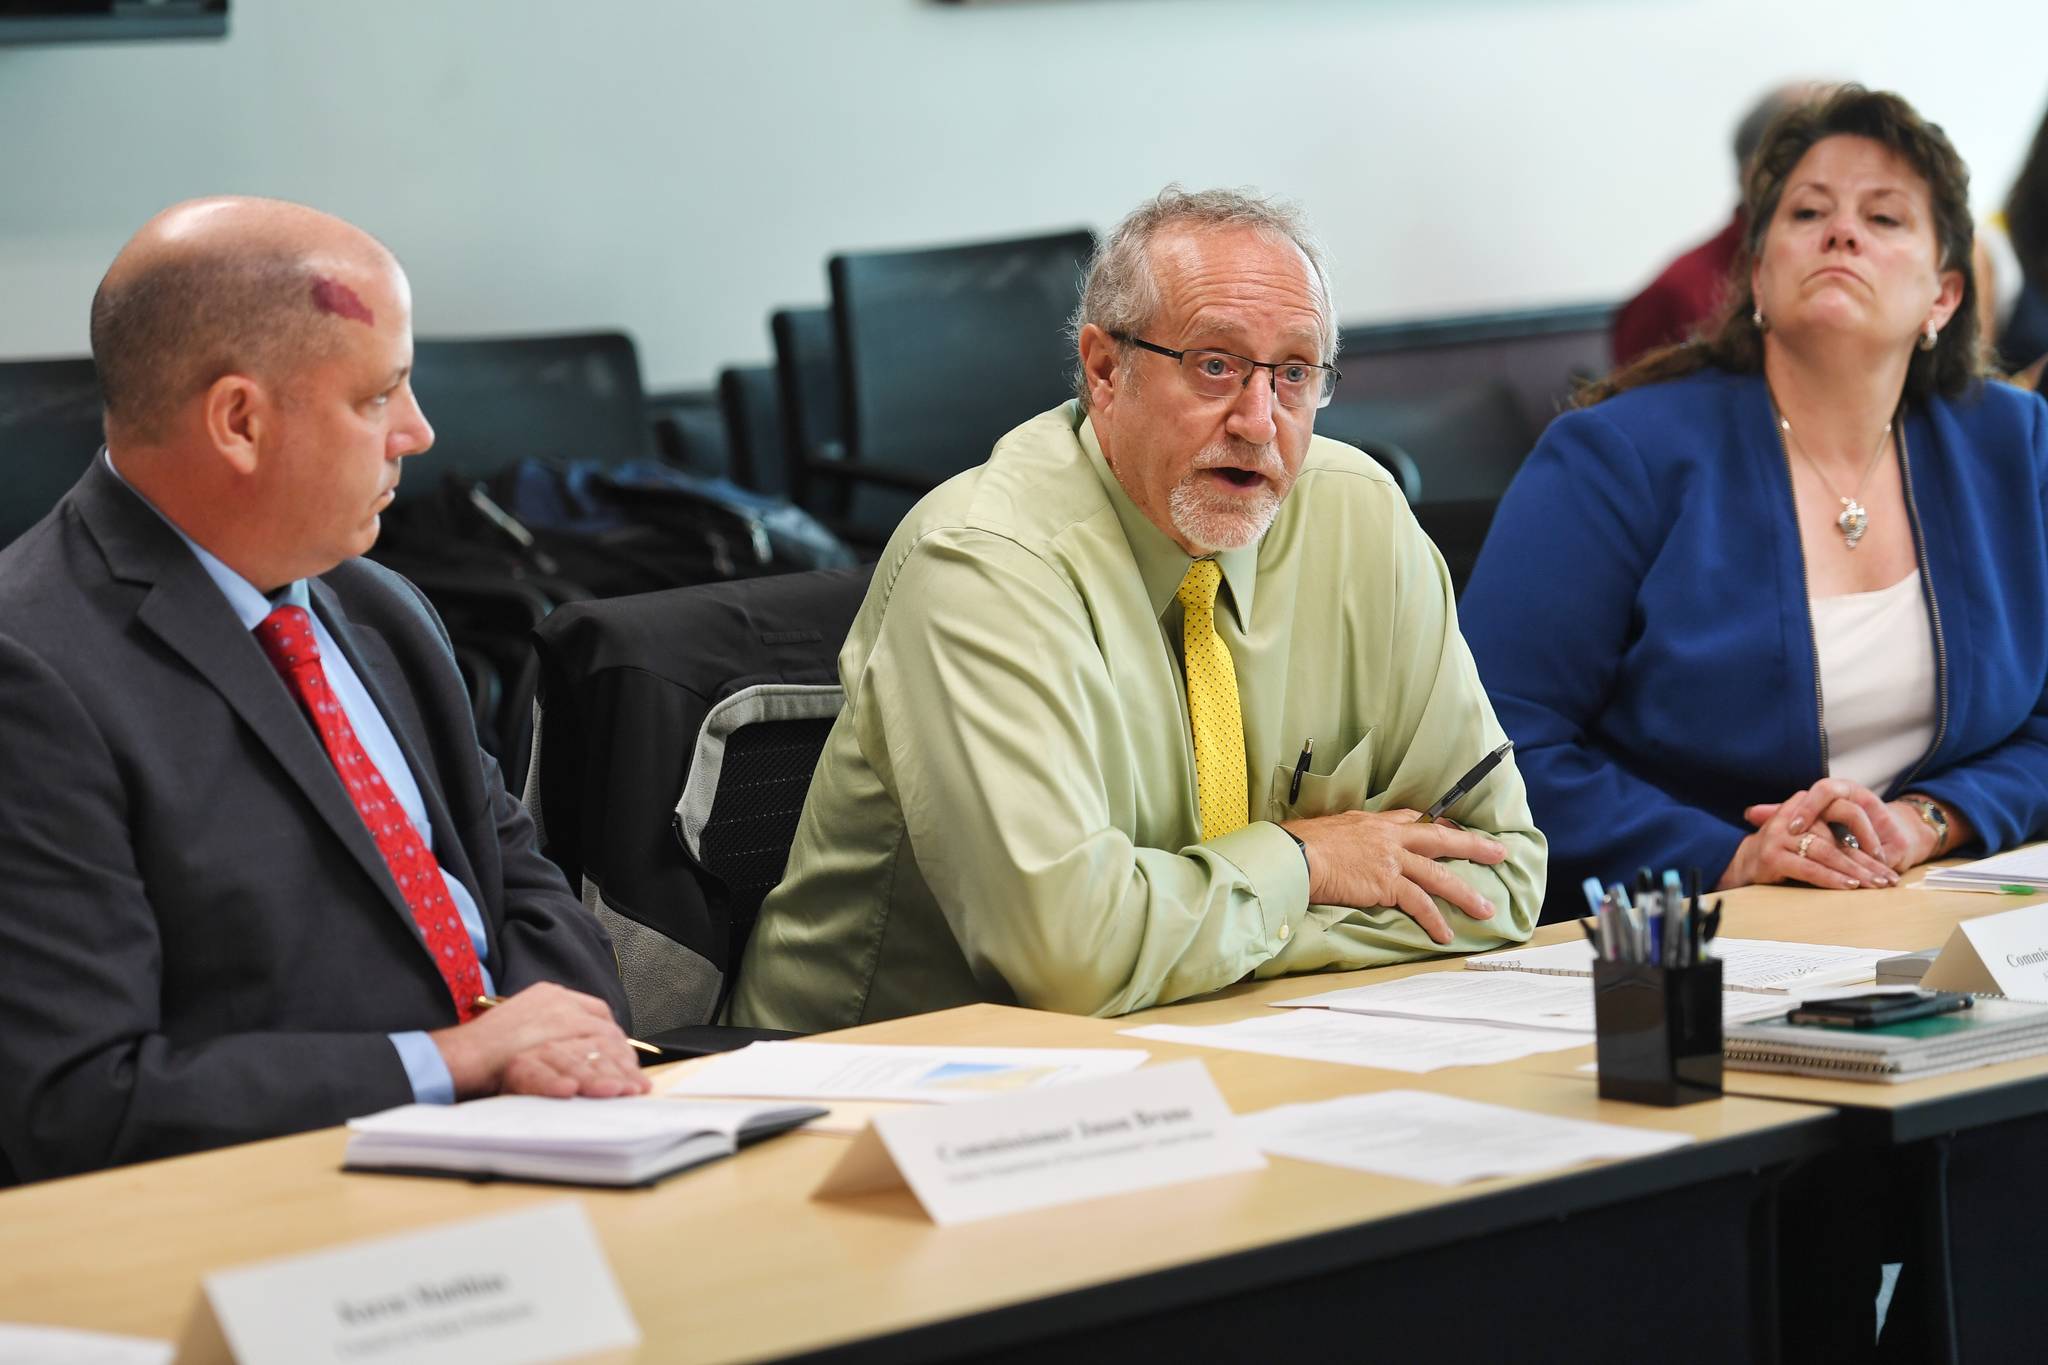 Doug Vincent-Lang, Commissioner of the Alaska Department of Fish and Game, center, speaks during a roundtable meeting on Alaska-British Columbia Transboundary mining at the Federal Building in Juneau on Monday, Aug. 5, 2019. Corri Feige, Commissioner of the Alaska Department of Natural Resources, right, and Jason Brune, Commissioner of the Alaska Department of Environmental Conservation, listen. (Michael Penn | Juneau Empire)